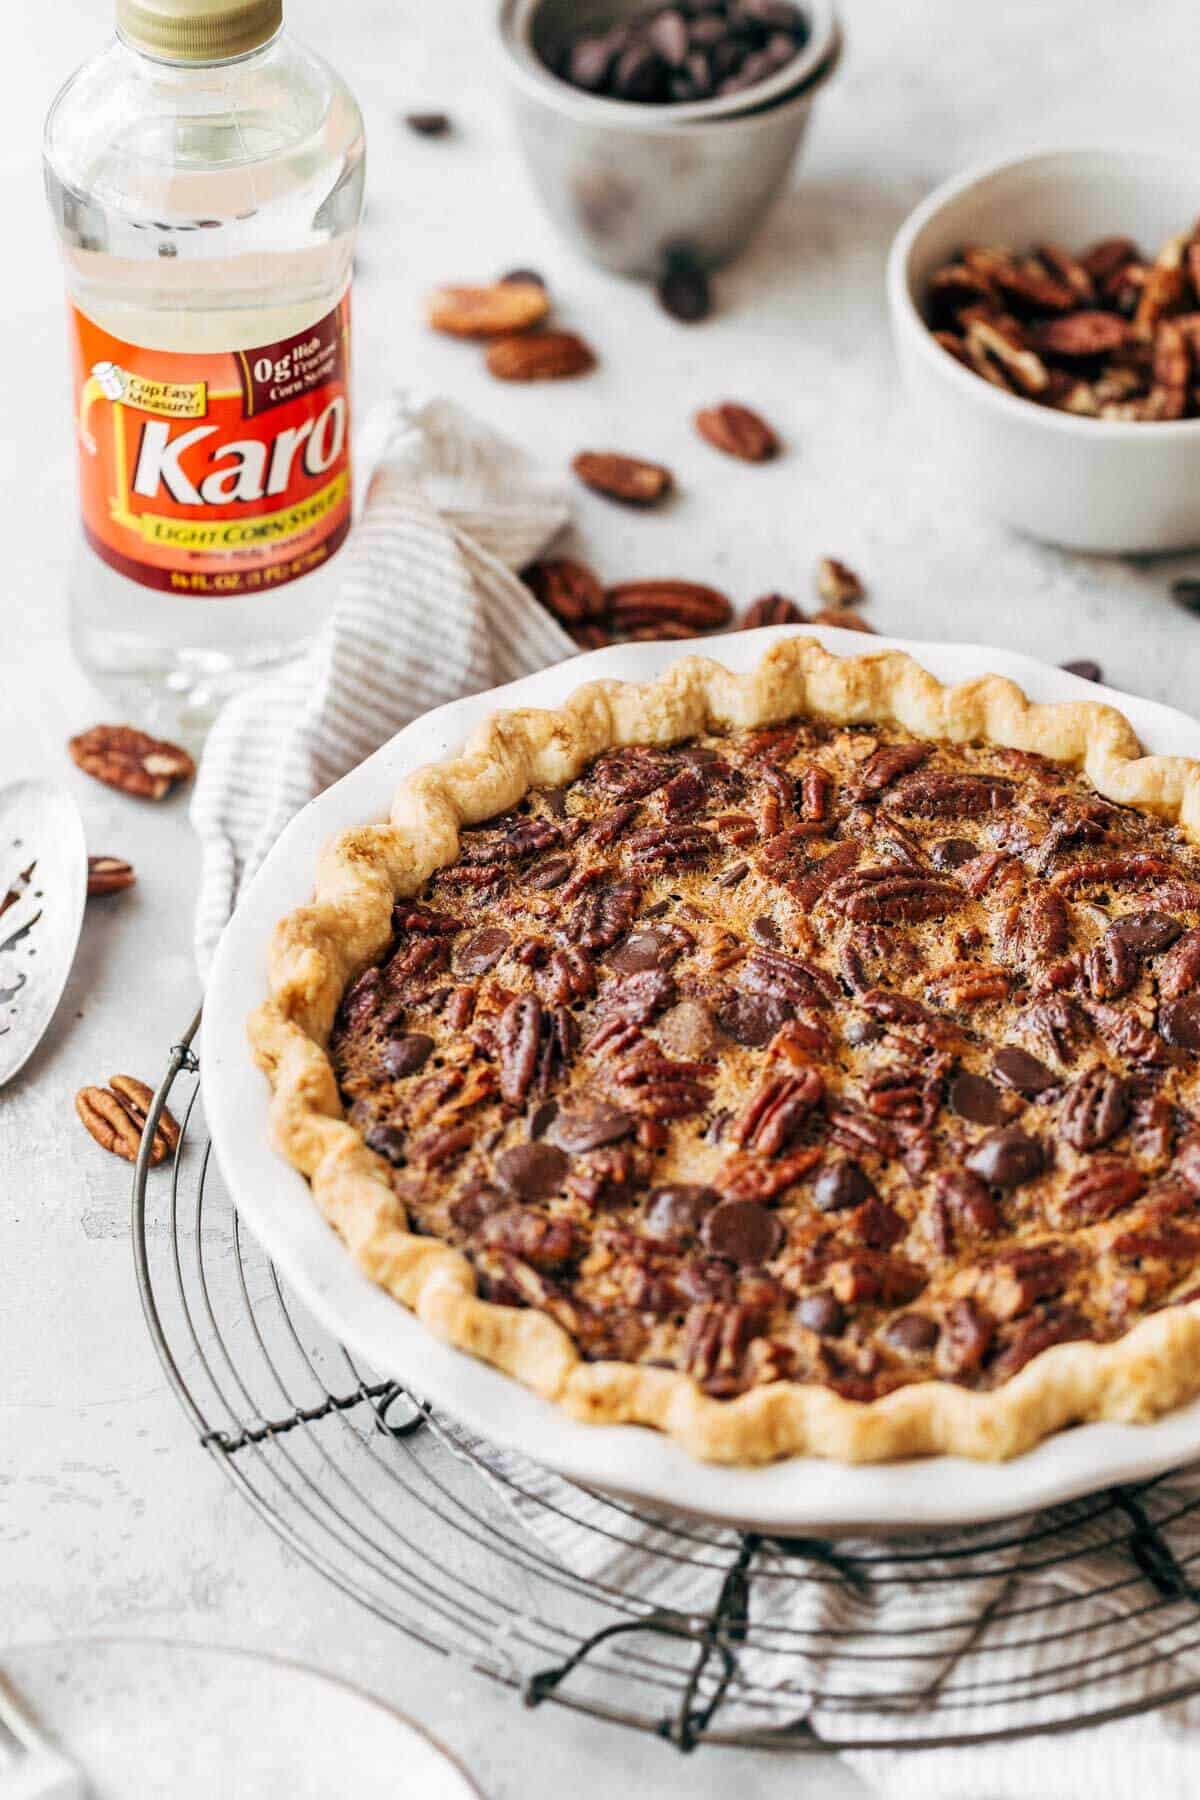 Baked chocolate pecan pie with a bottle of corn syrup in the background.